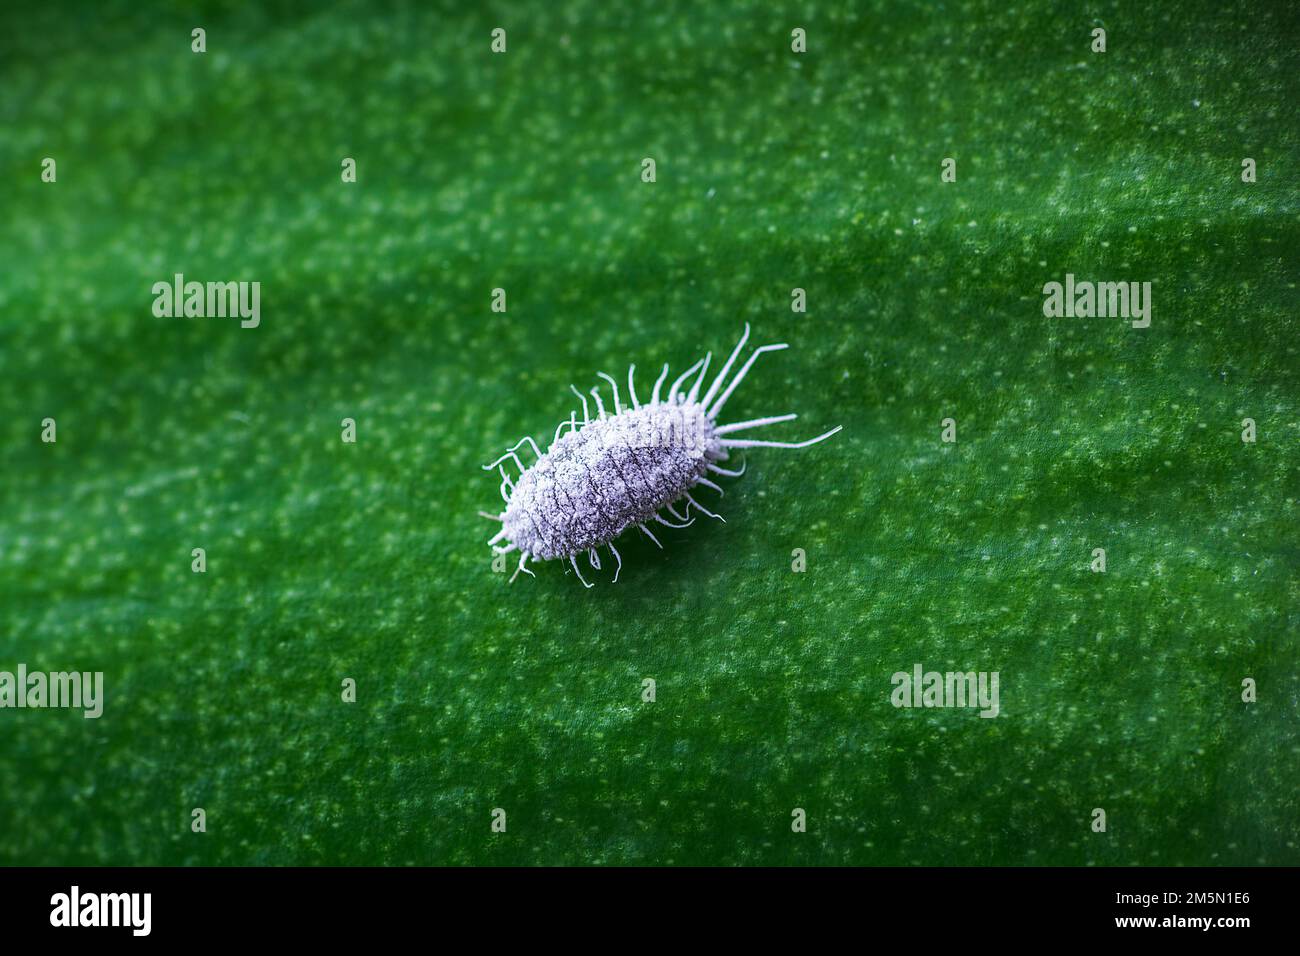 Mealybug, planococcus citrus, dangerous pest on orchid leaf. Macro photo of tropical damaging insect Stock Photo